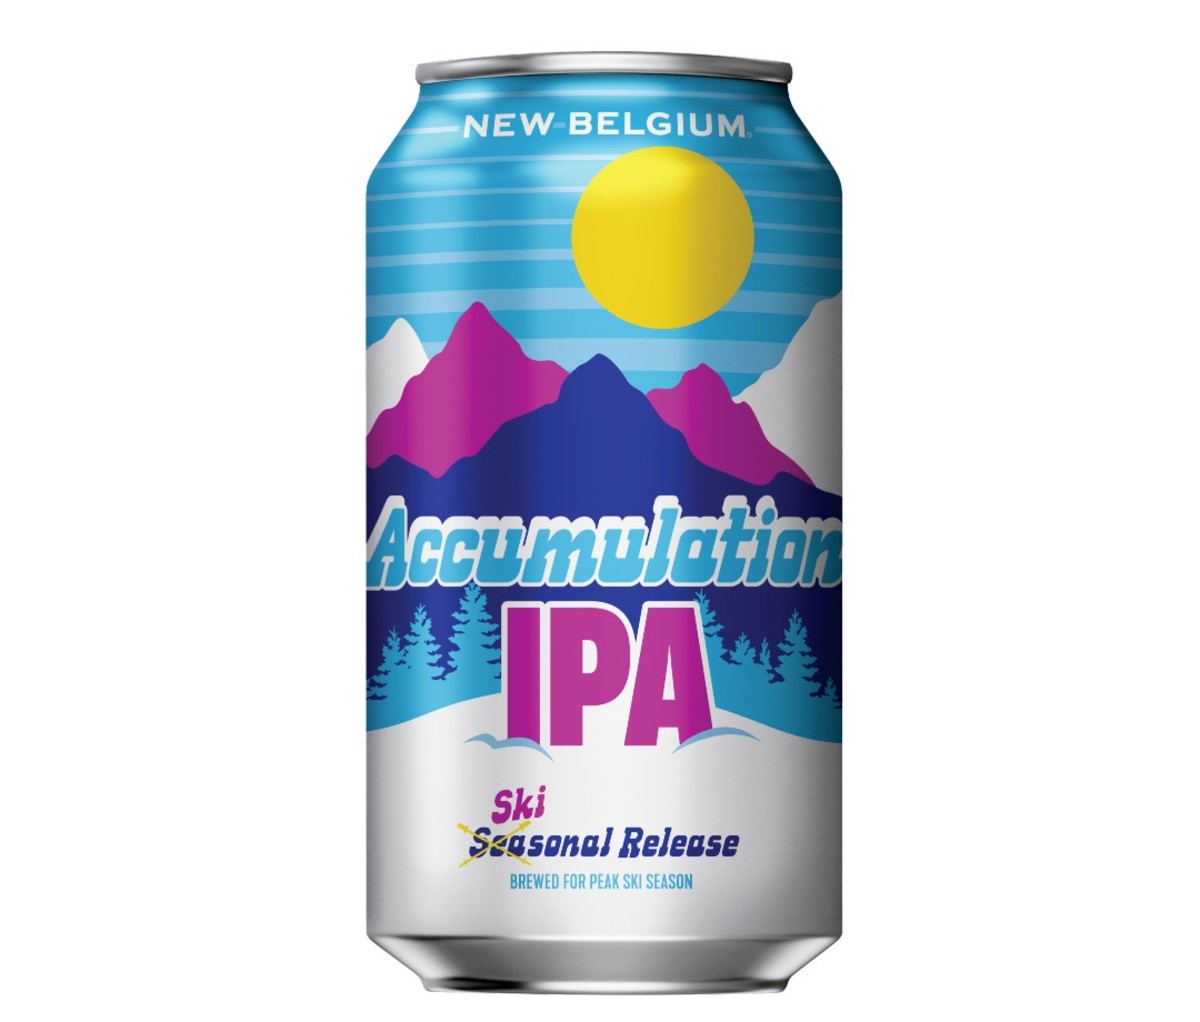 A can of New Belgium Brewing Accumulation IPA